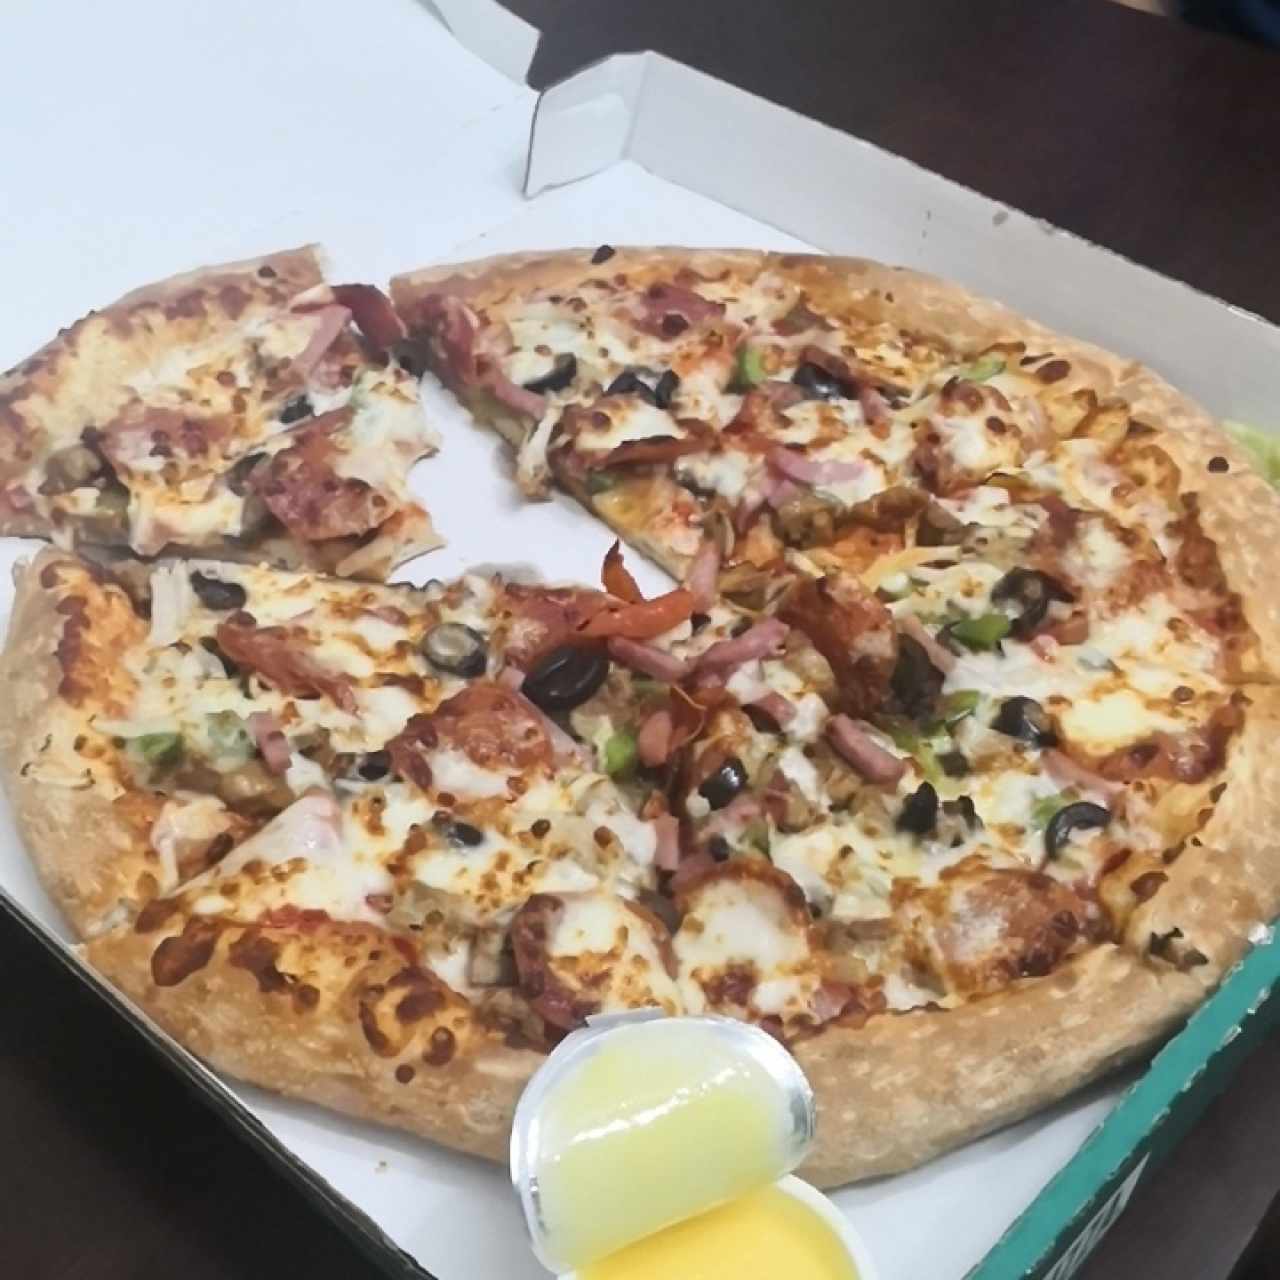 The works pizza